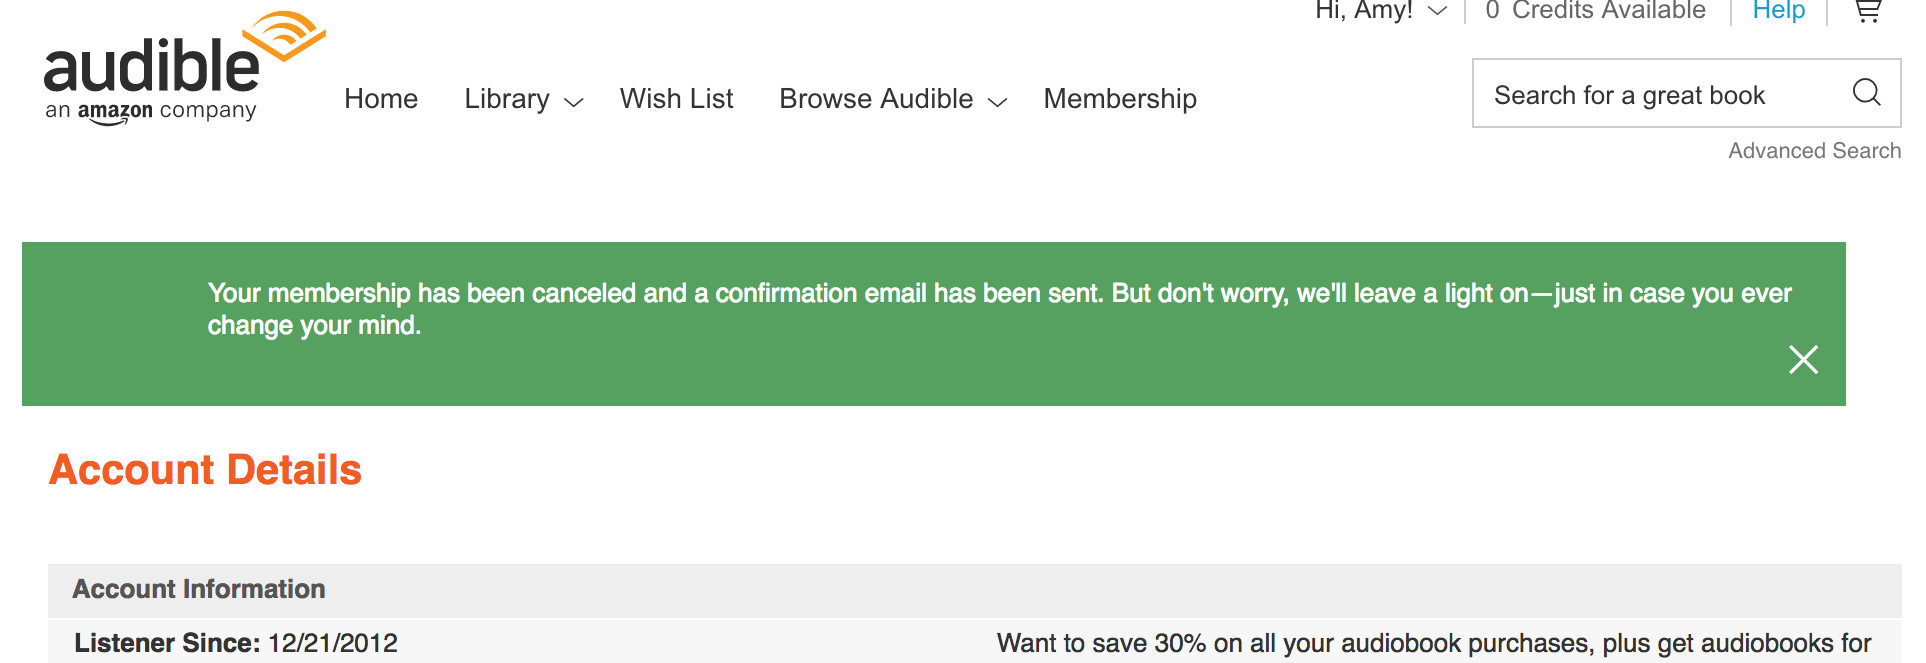 Cancellation confirmation message from Audible